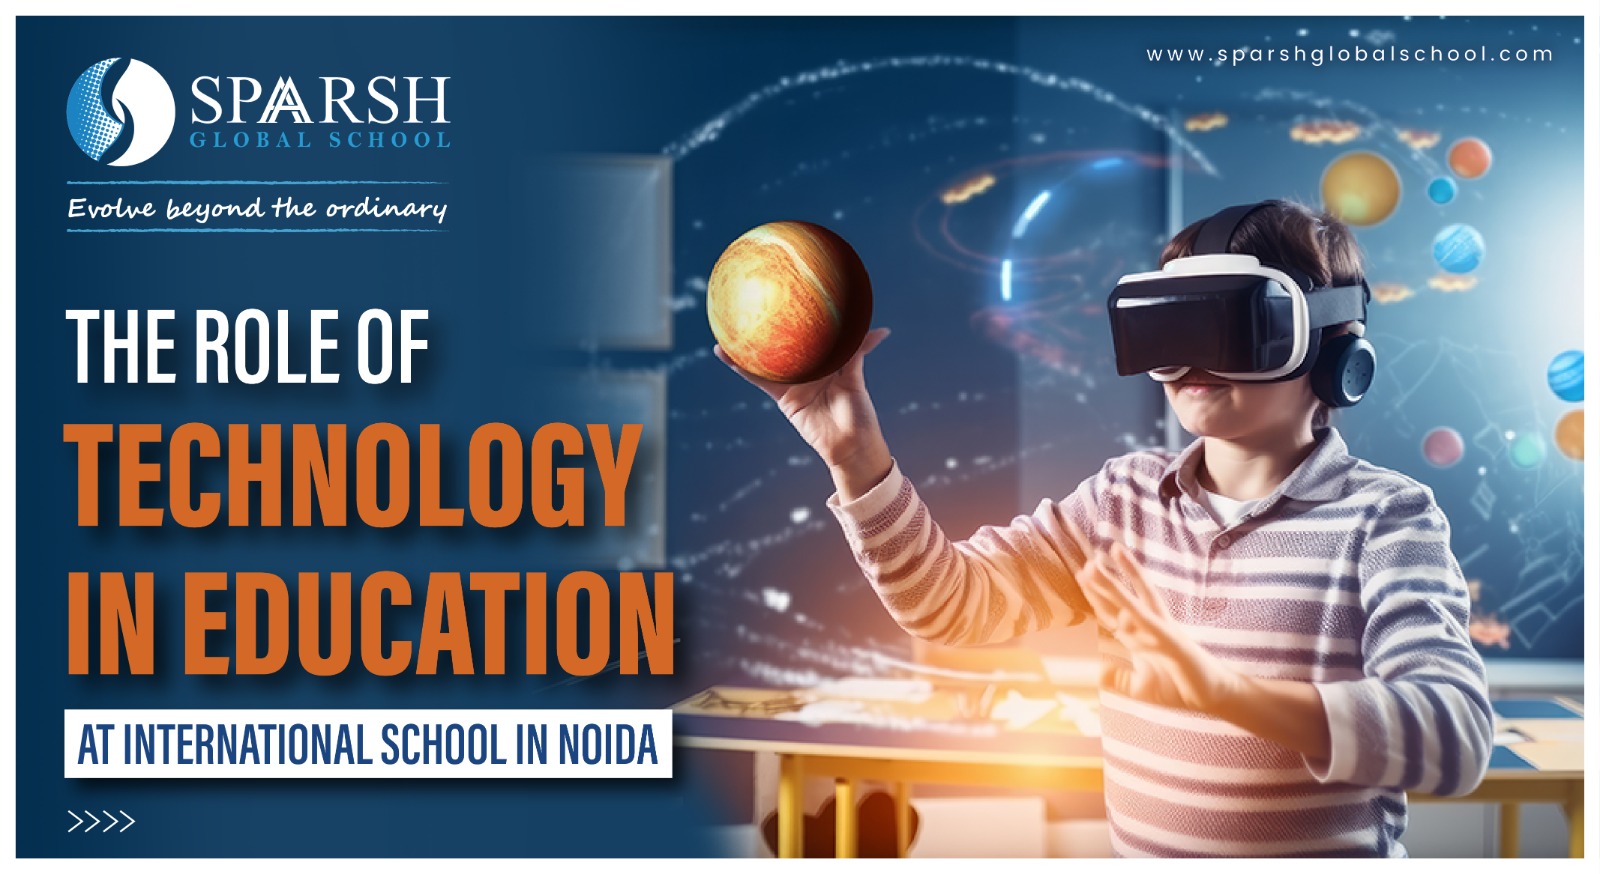 The Role of Technology in Education at International School in Noida